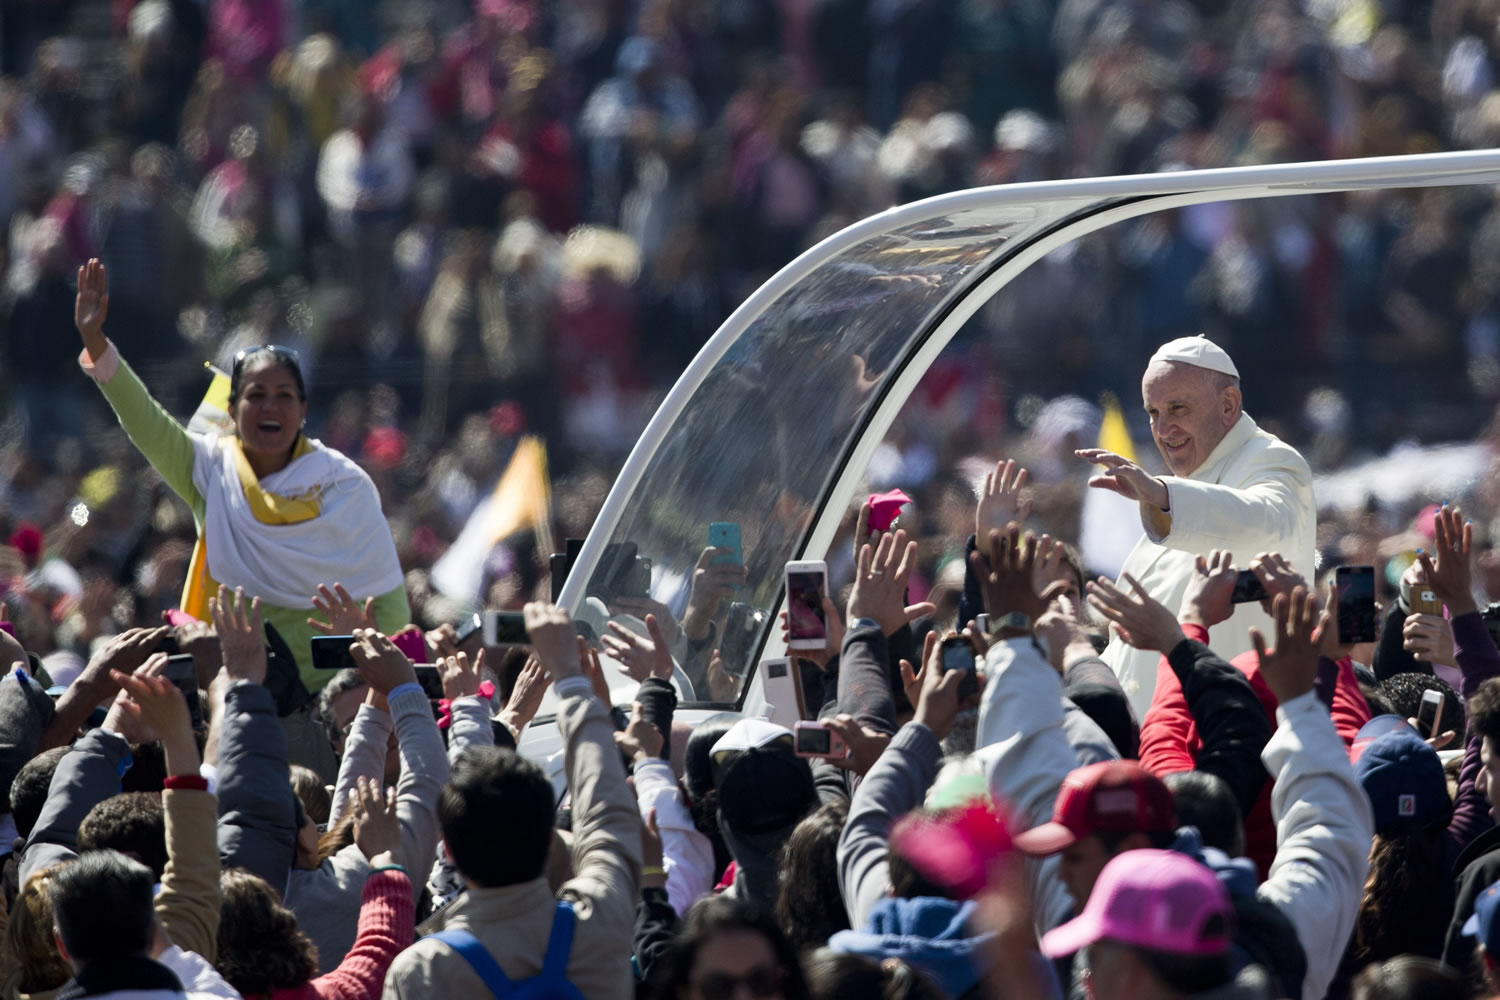 Pope Francis waves to the crowd, aboard the popemobile in Mexico City's main square, the Zocalo, Saturday, Feb. 13, 2016. Pope Francis kicks off his first trip to Mexico on Saturday with speeches to the country's political and ecclesial elites. The pontiff's five-day visit will include a very personal prayer at the Virgin of Guadalupe shrine.